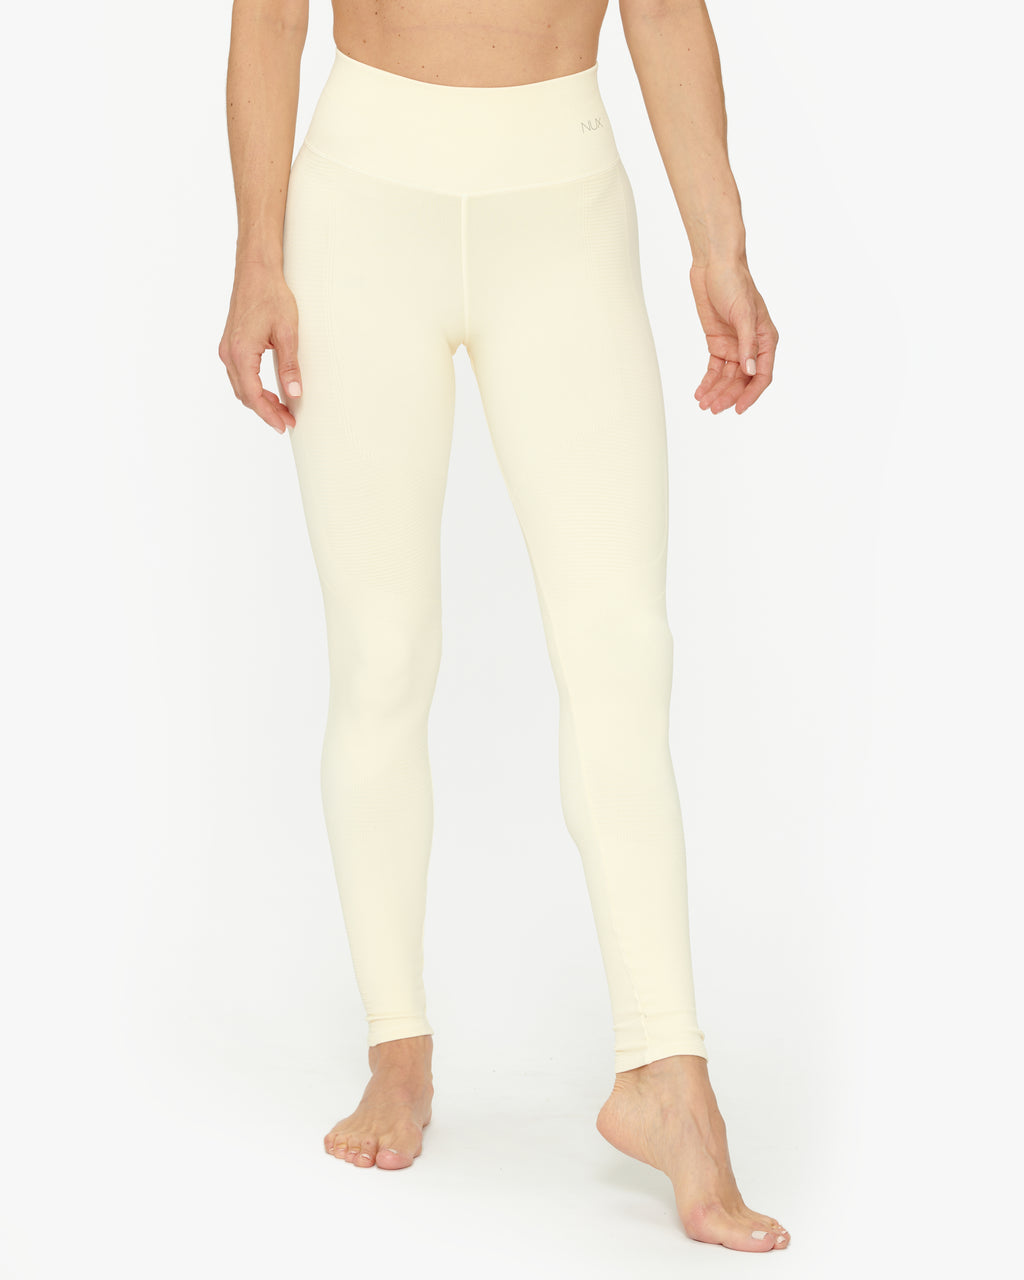 Nux One by One Legging – The Shop at Equinox